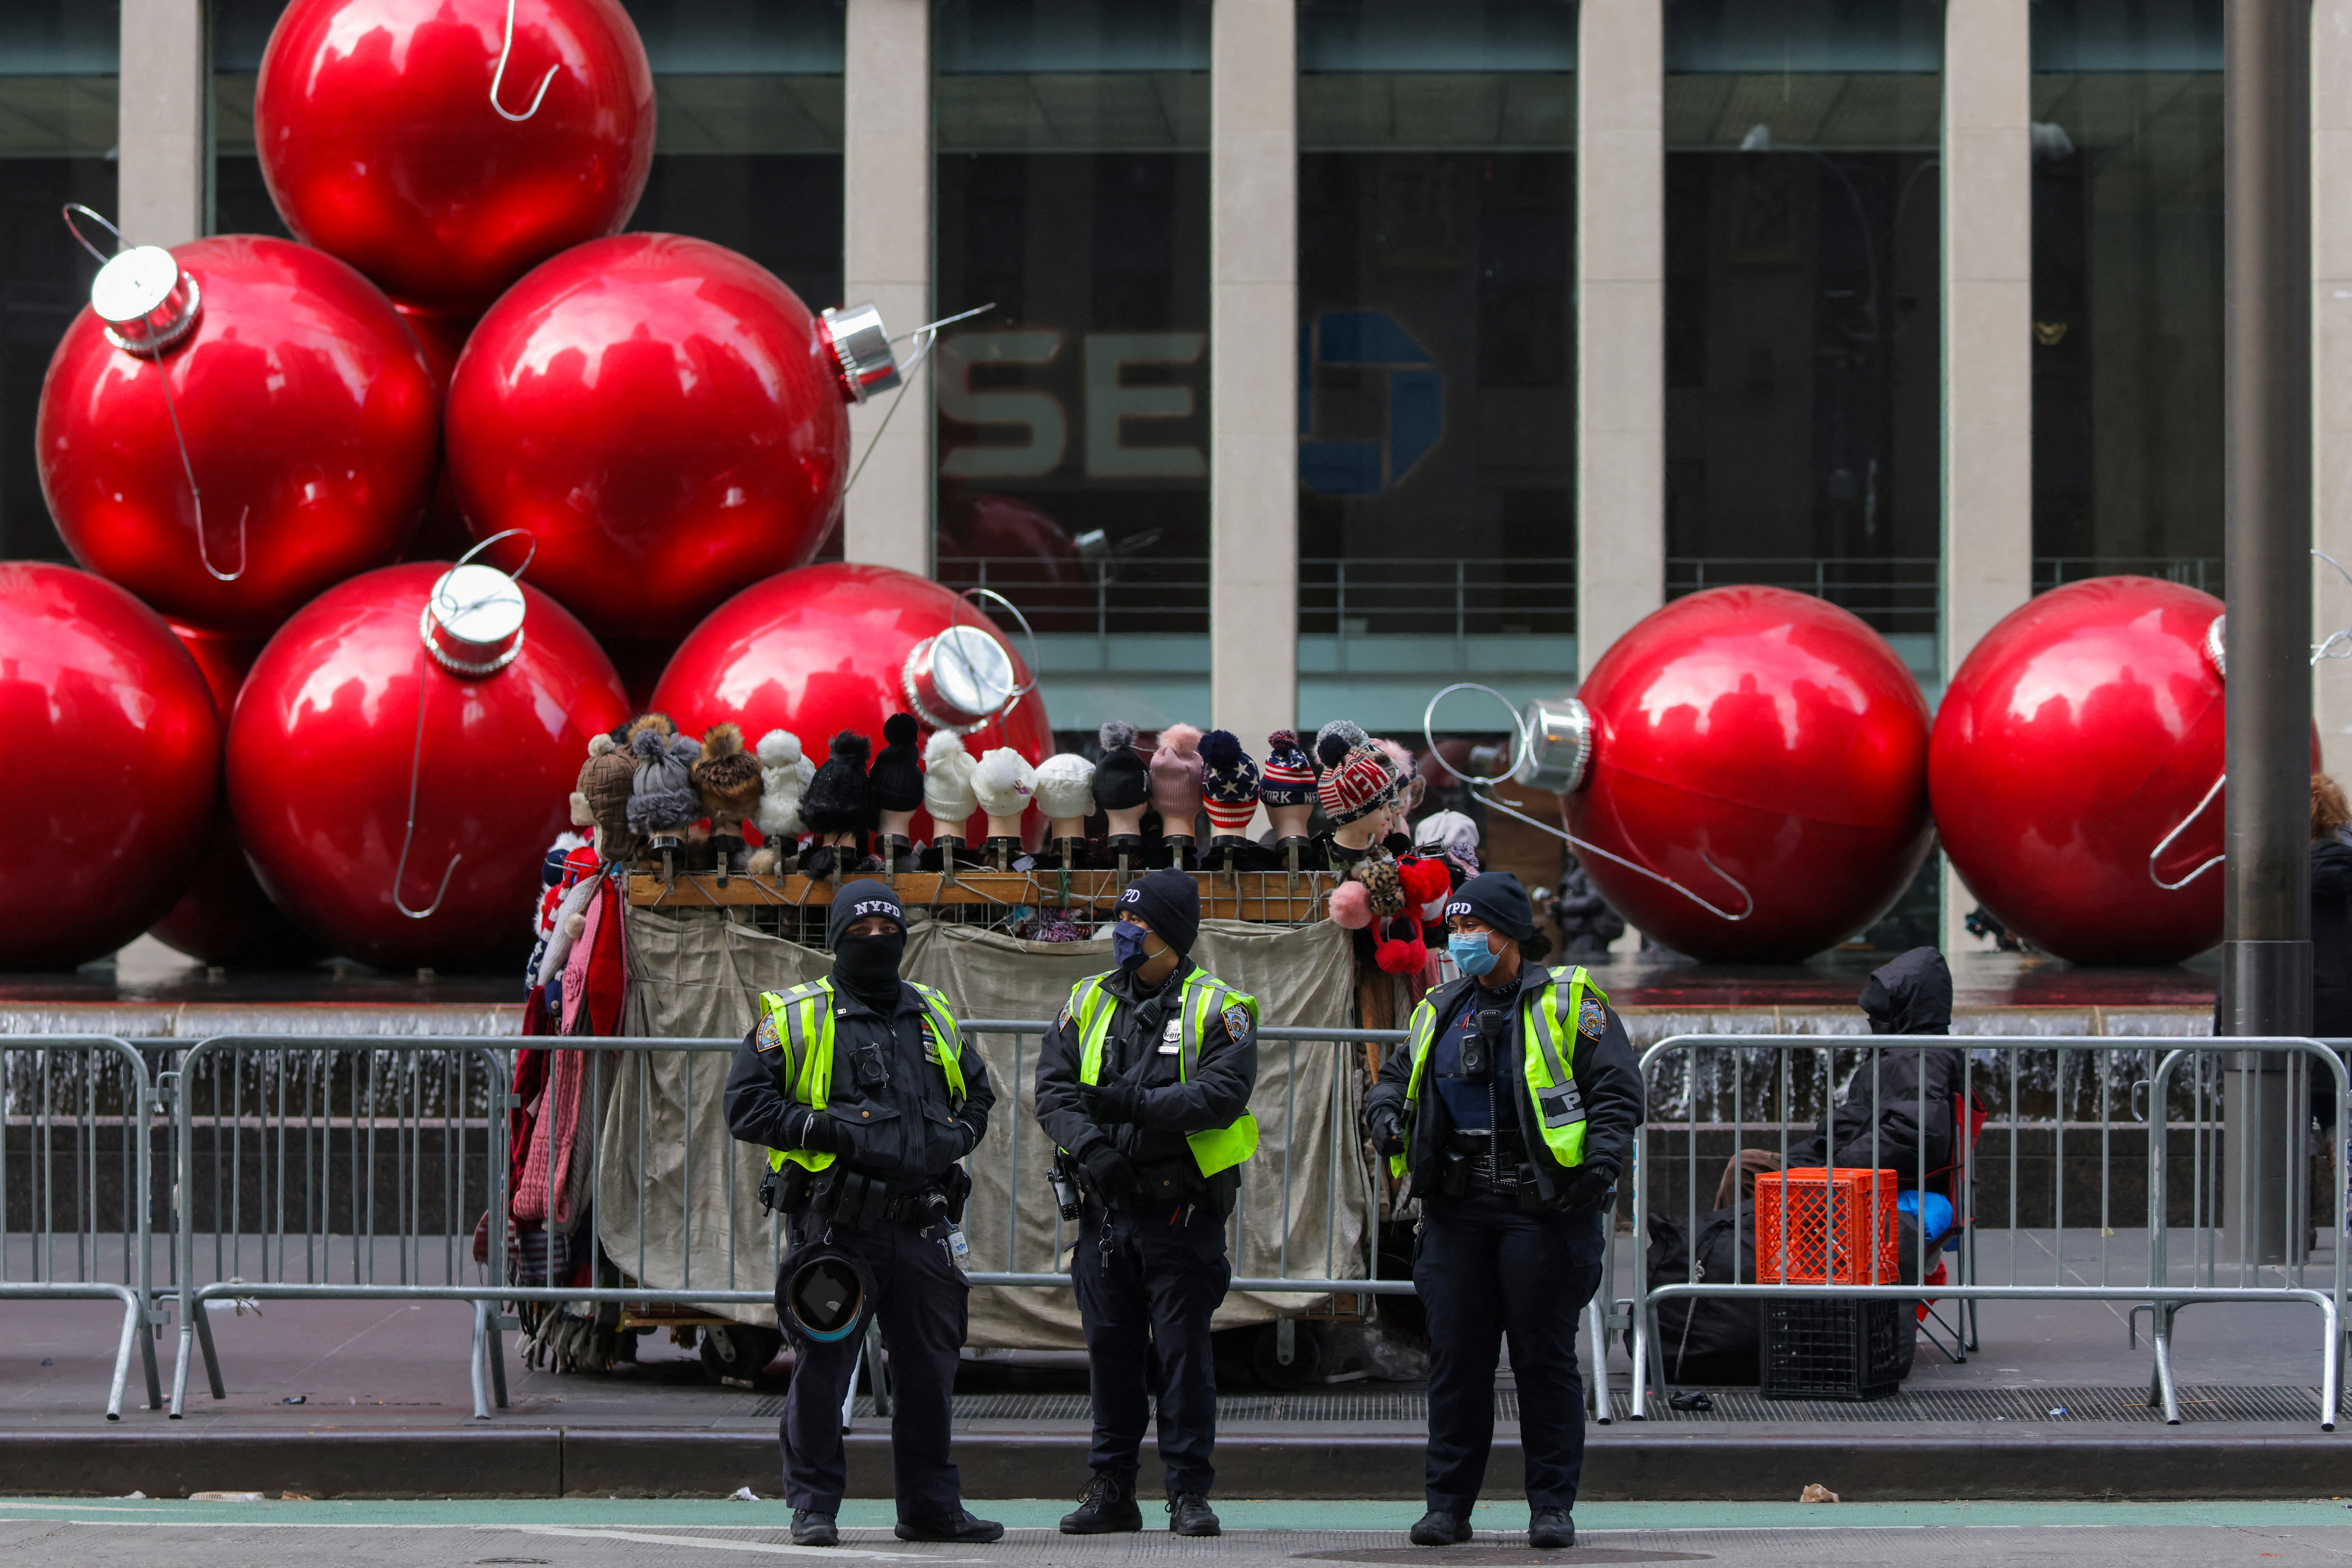 Members of the New York City Police Department (NYPD) wear face masks as they stand in front of holiday decorations on Sixth Avenue as the Omicron coronavirus variant continues to spread in Manhattan, New York City, U.S., December 19, 2021. REUTERS/Andrew Kelly